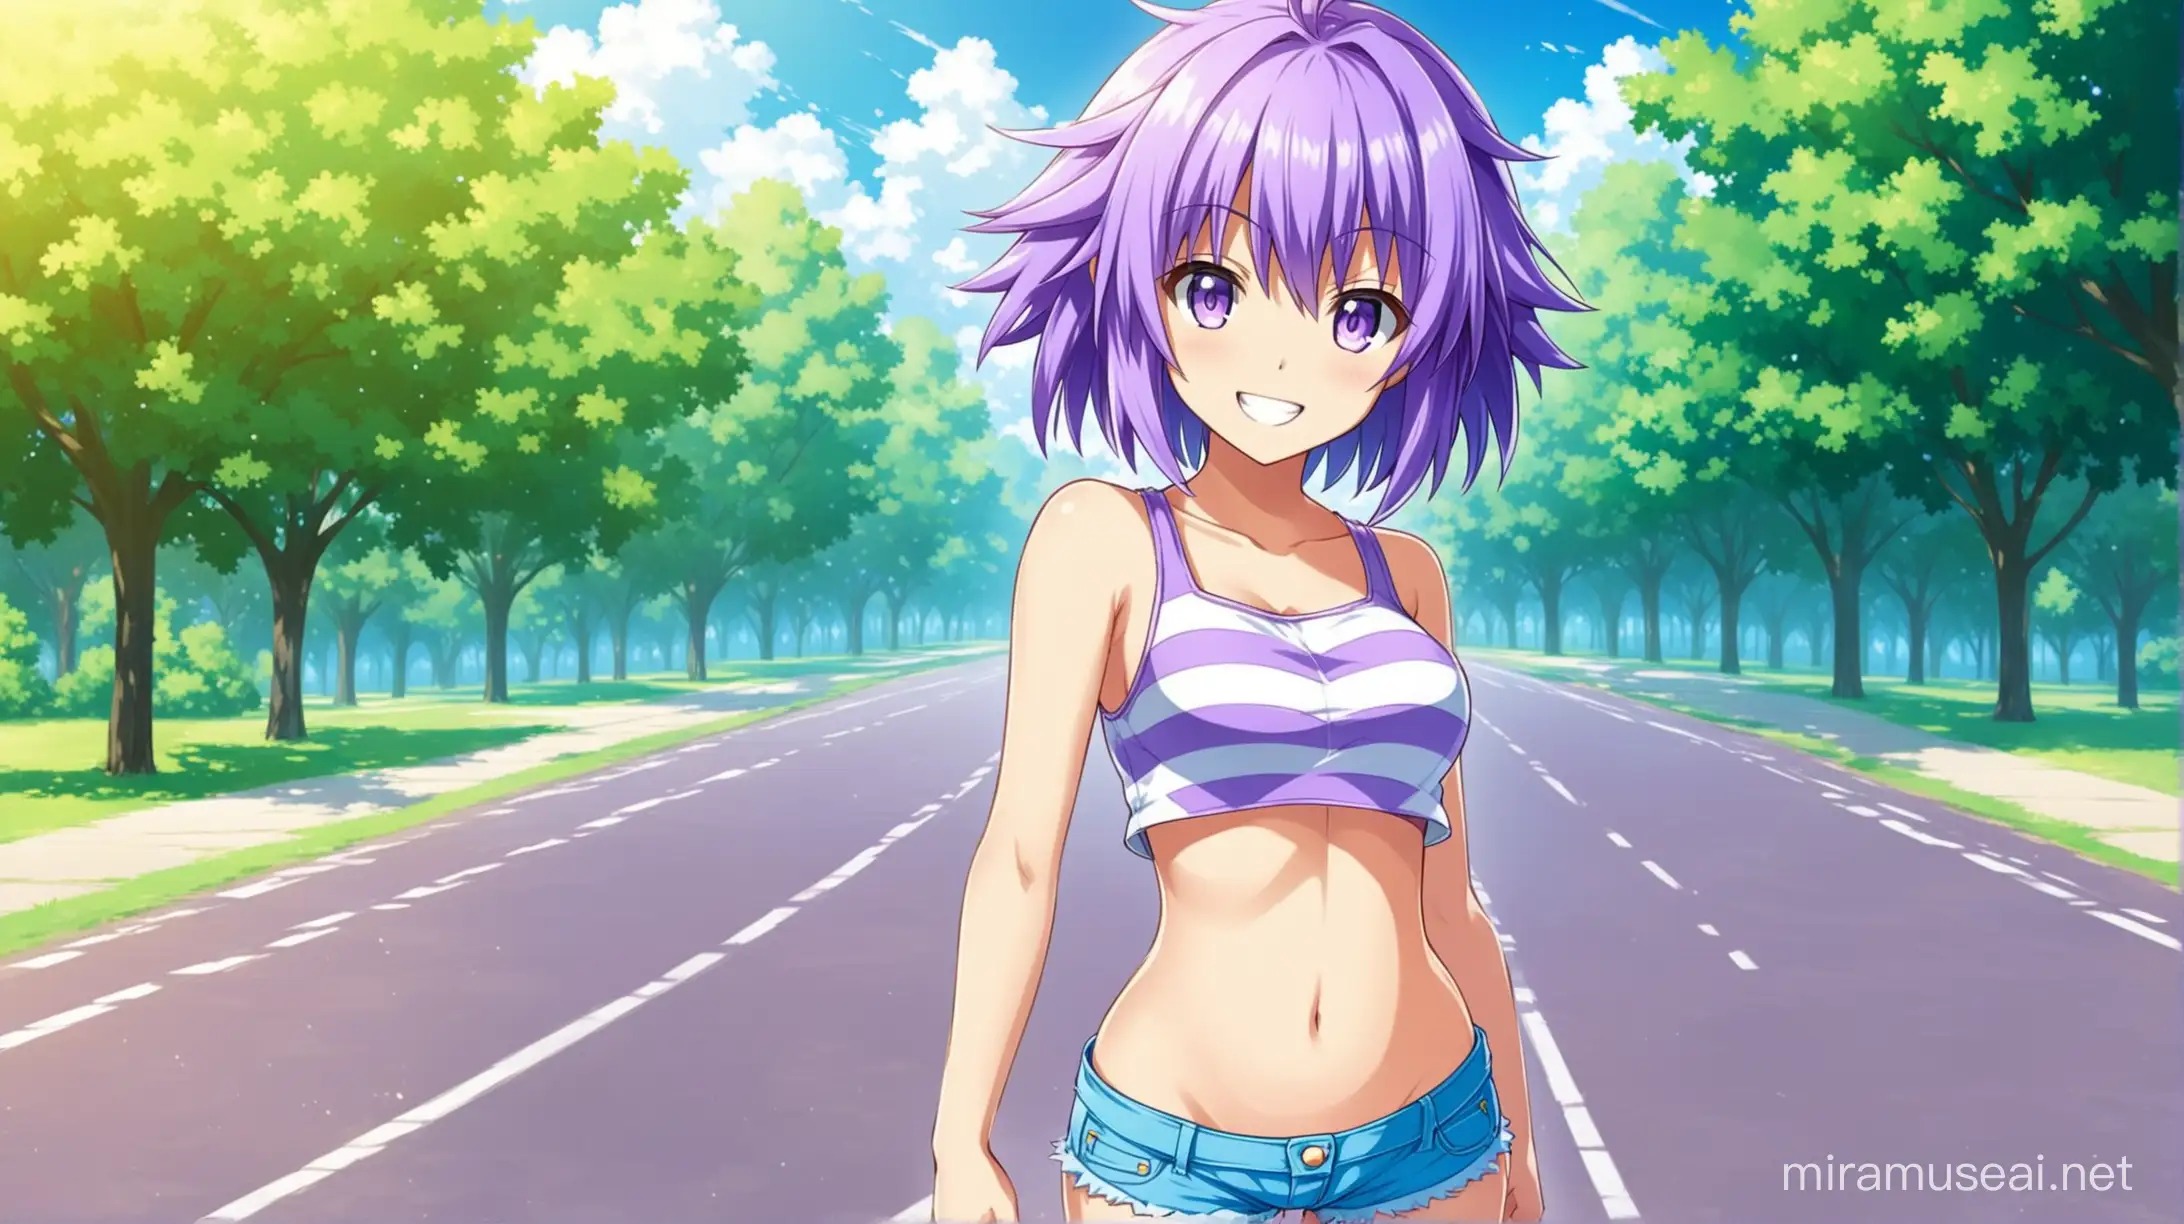 Draw the character Neptune from the Hyperdimension Neptunia series with short hair standing alone outside on a sunny day while she is wearing jean shorts and a shirt and smiling at the viewer